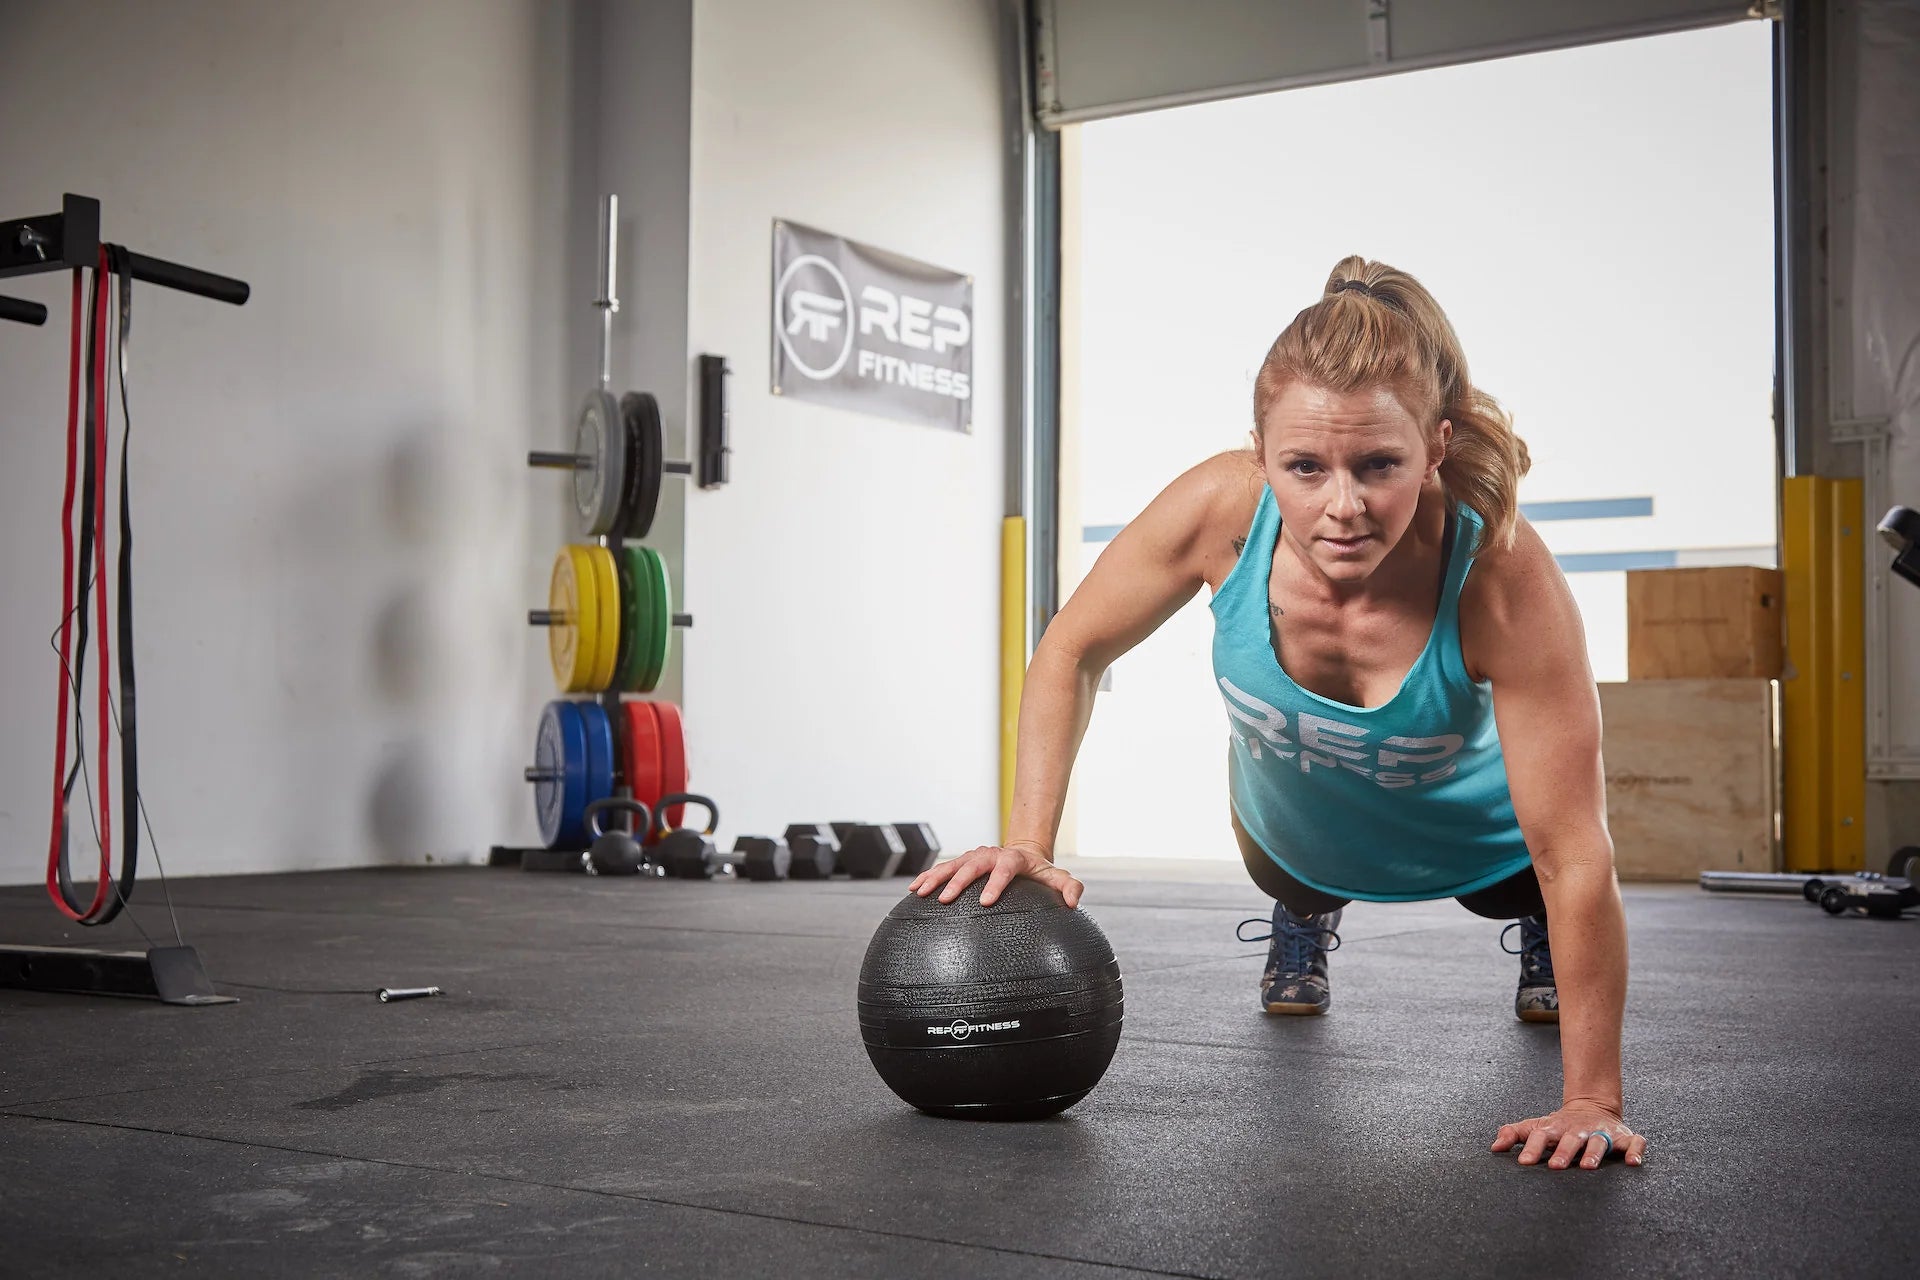 The Ultimate Buying Guide for Slam Ball – Nordic Lifting